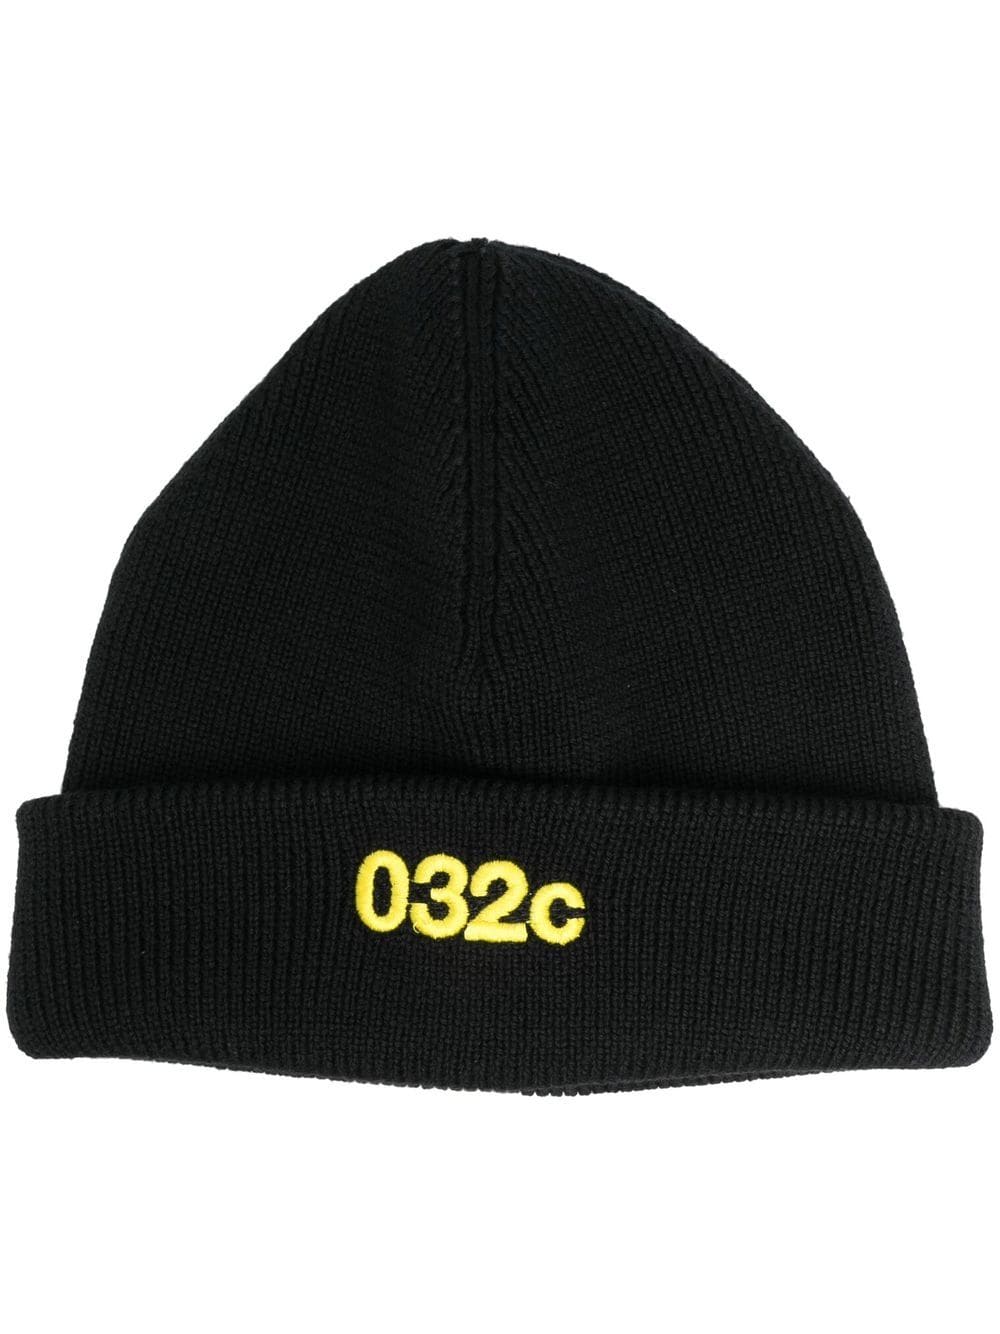 032C EMBROIDERED-LOGO KNIT BEANIE